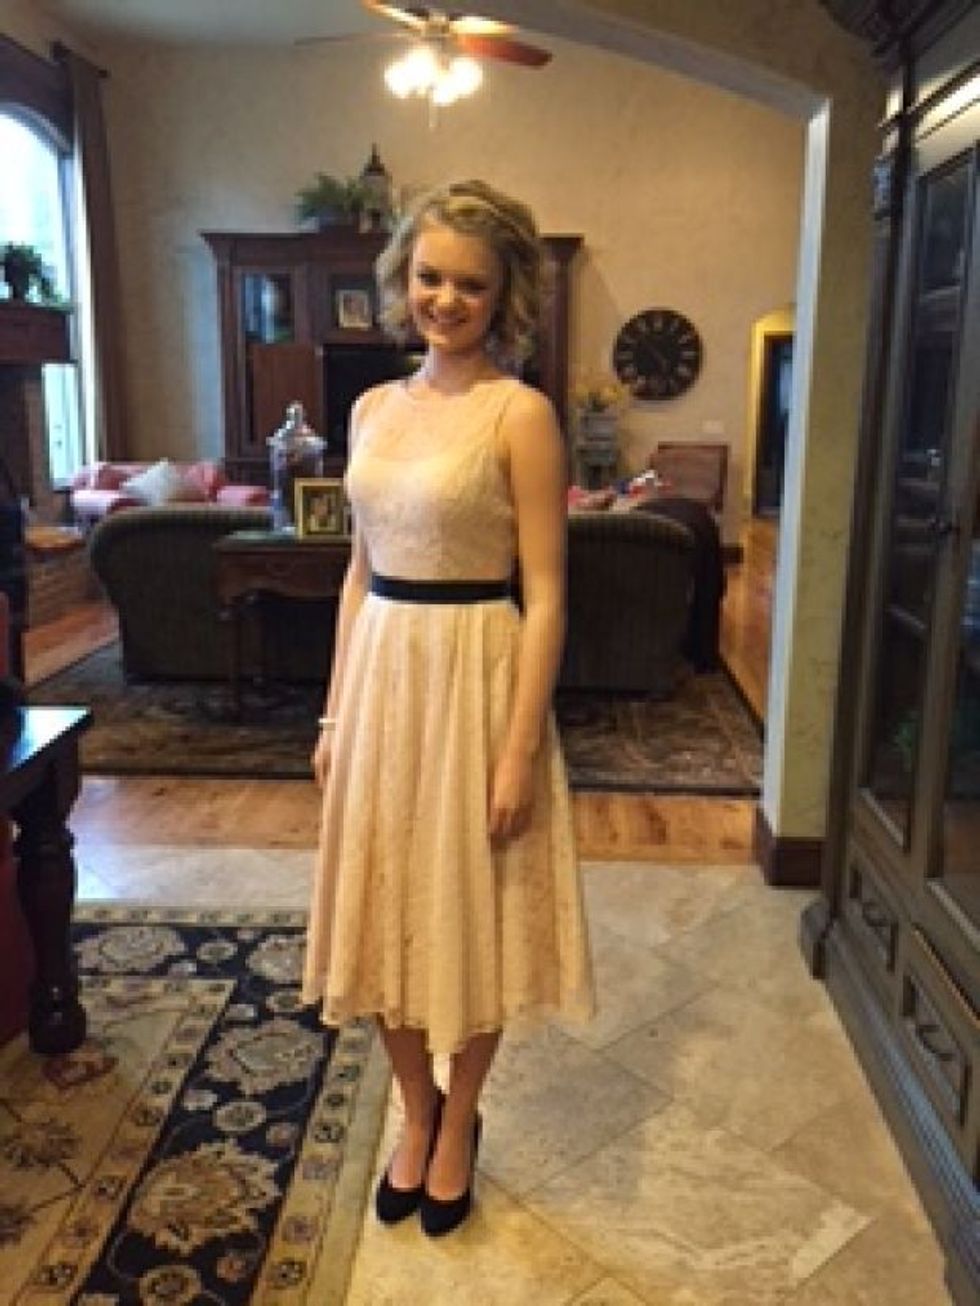 Can You See Why School Administrators in Utah Had a Problem With 15-Year-Old's Dress?